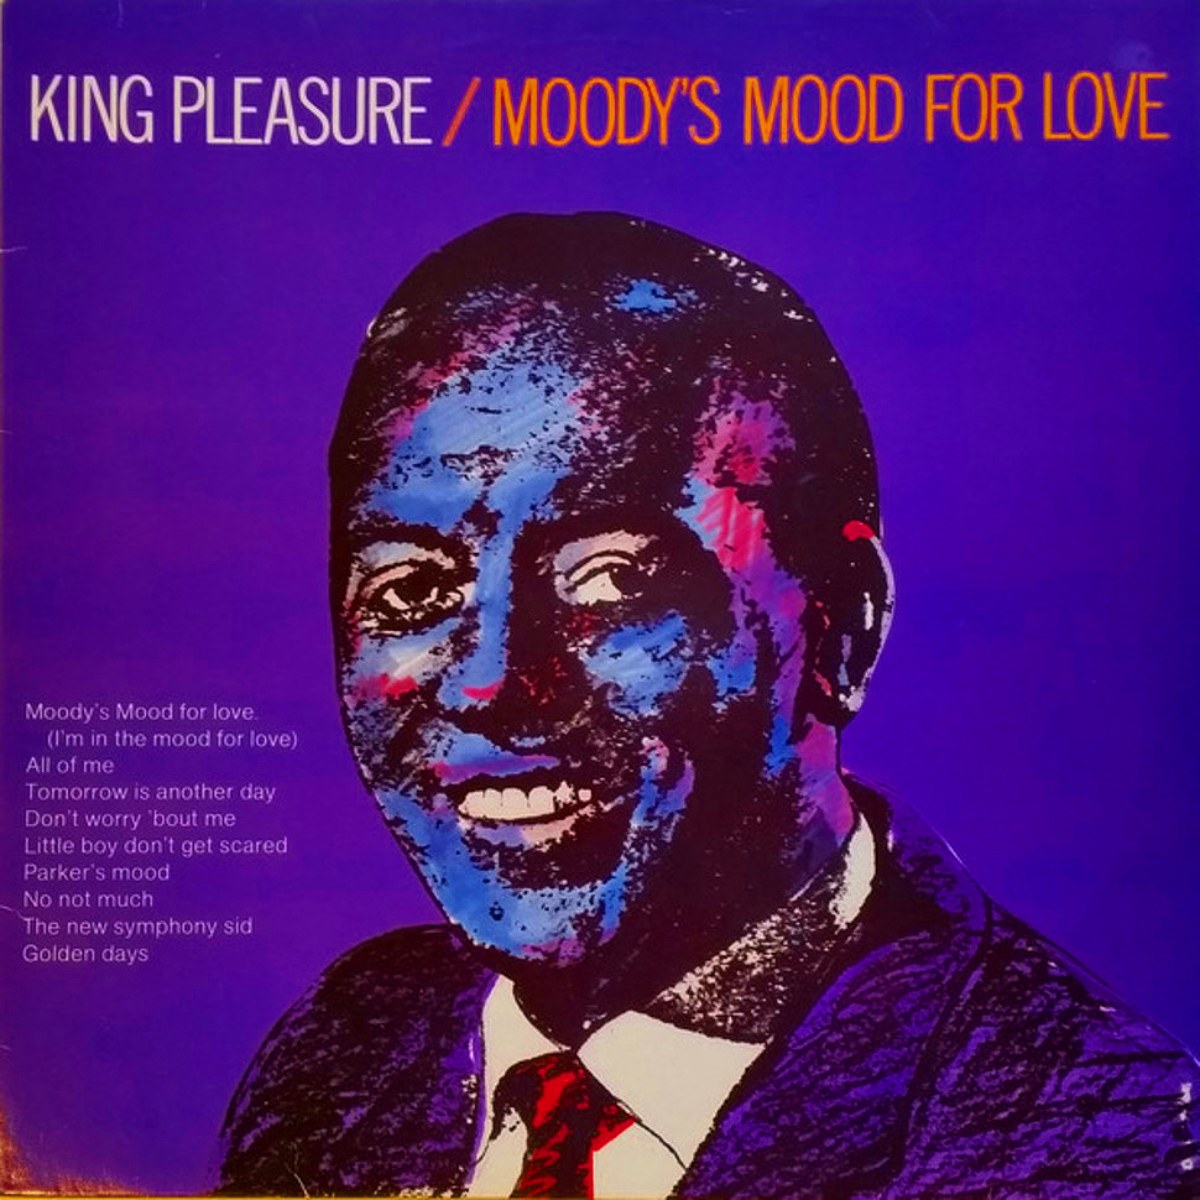 King Pleasure, cover of Moody's Mood for Love single